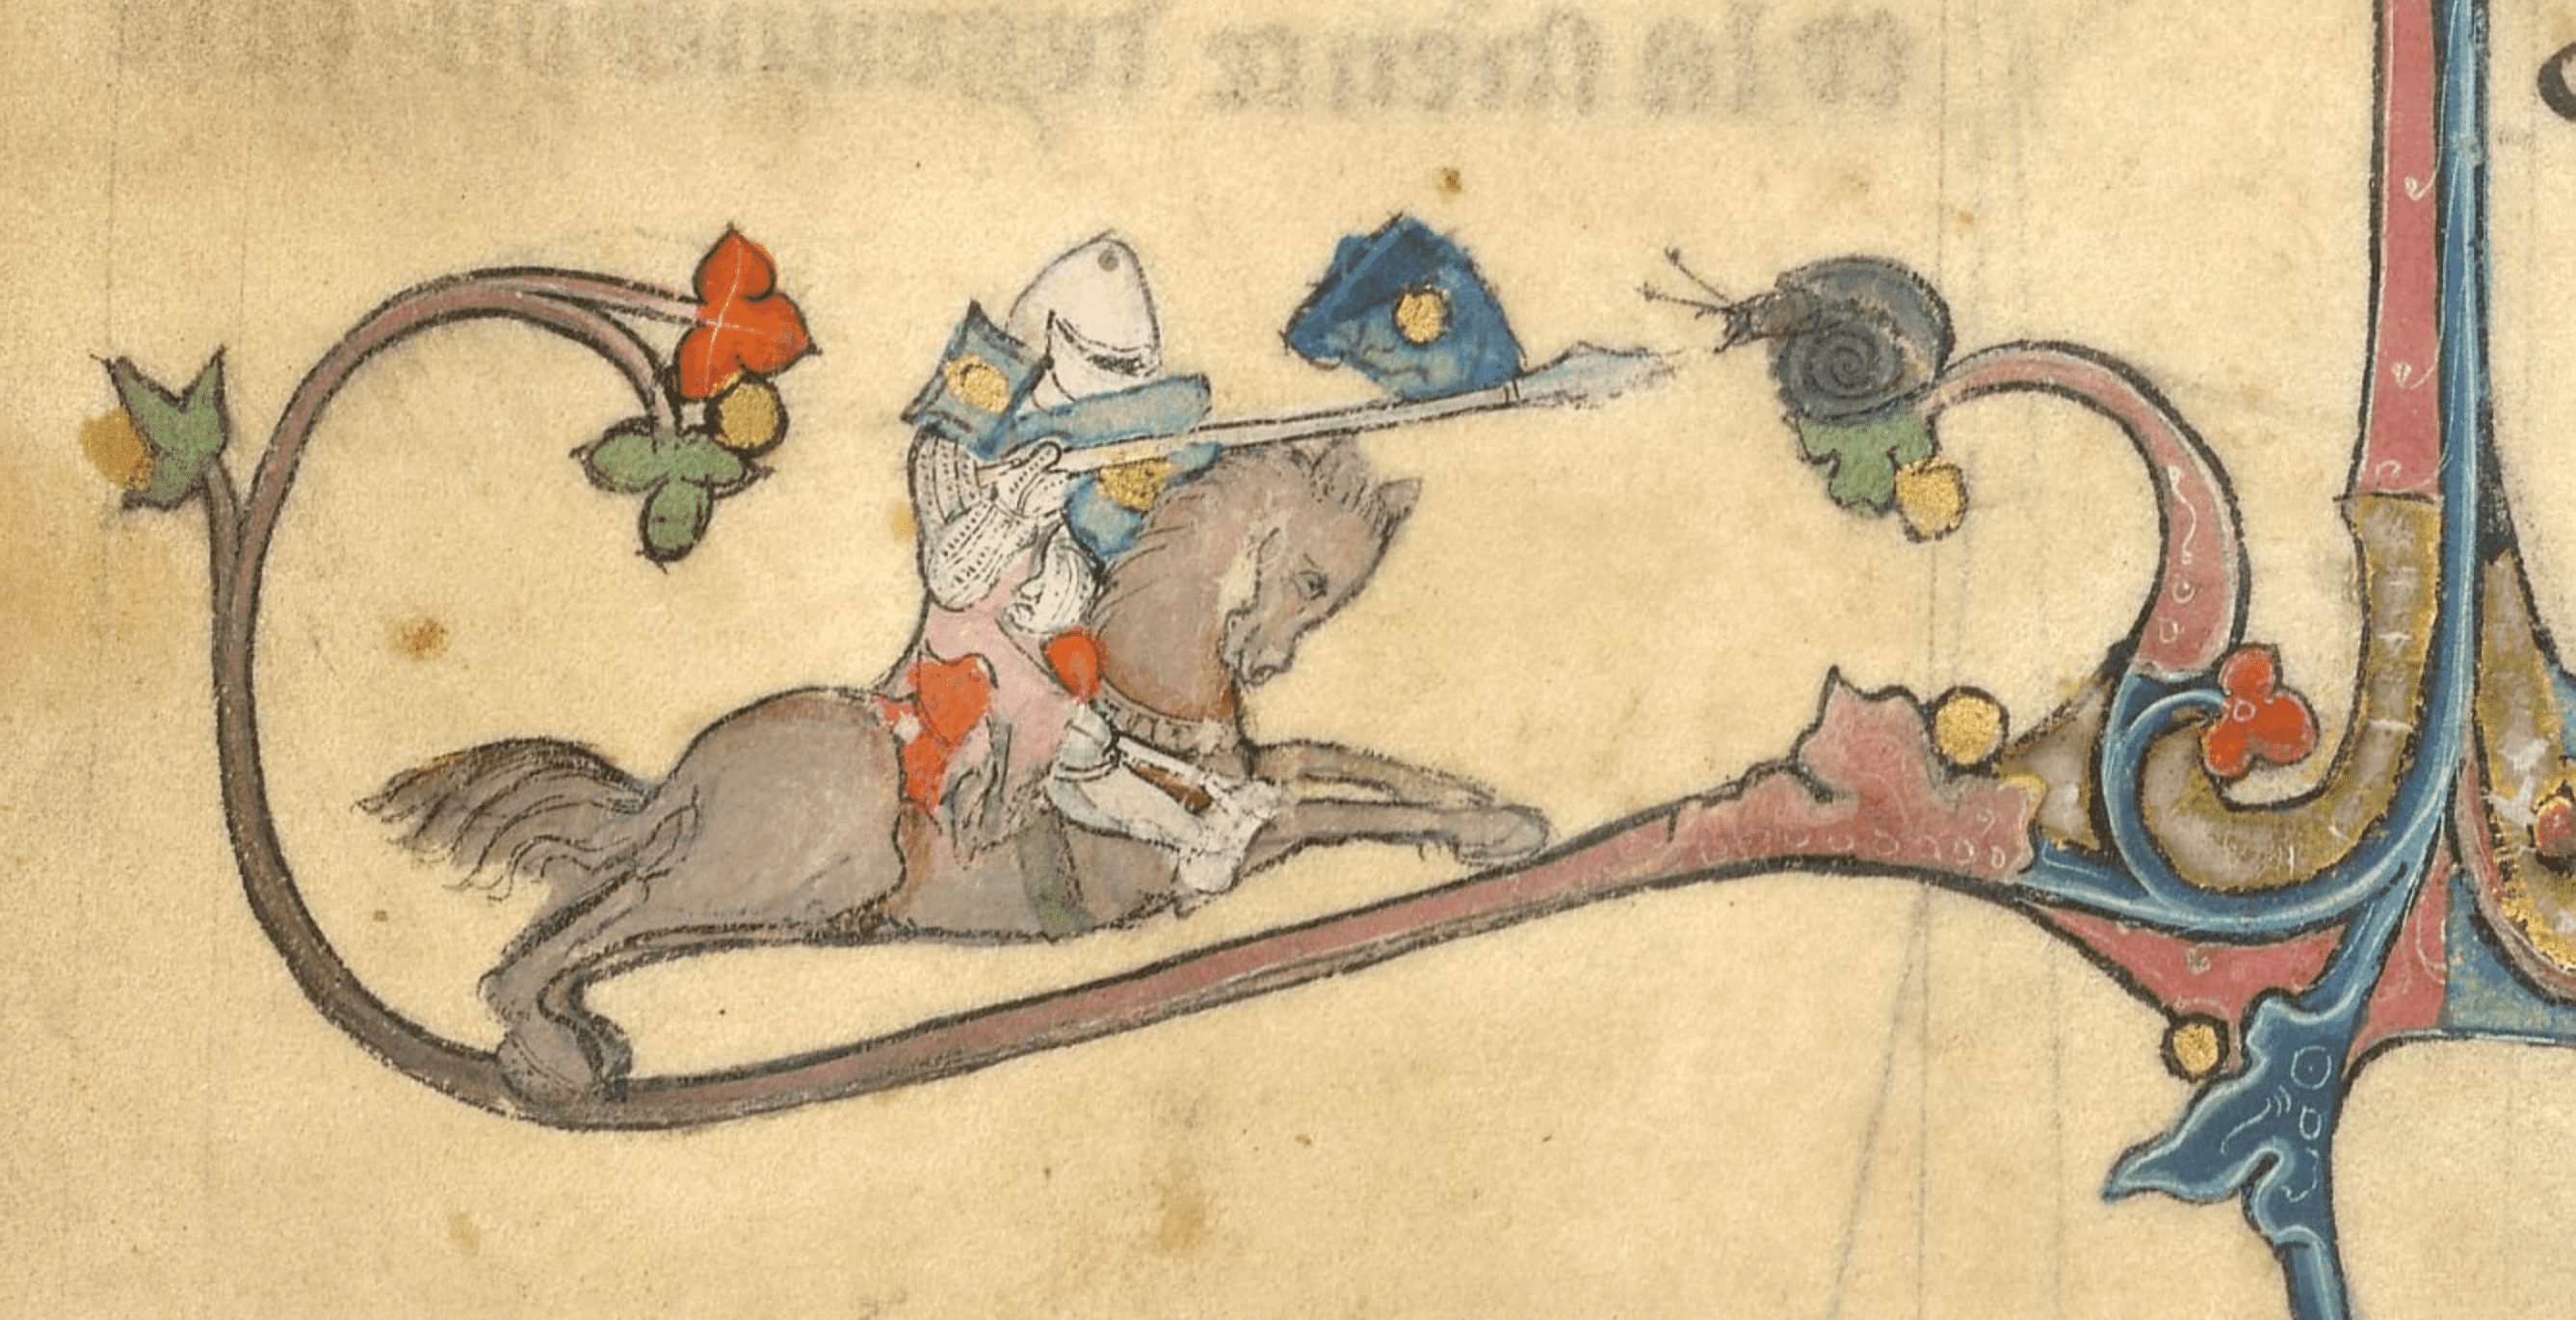 A medieval marginalia depicting a knight jousting a snail. From Brunetto Latini's Li Livres dou Tresor, France (Picardy), c. 1315-1325, Yates Thompson MS 19, f. 65r